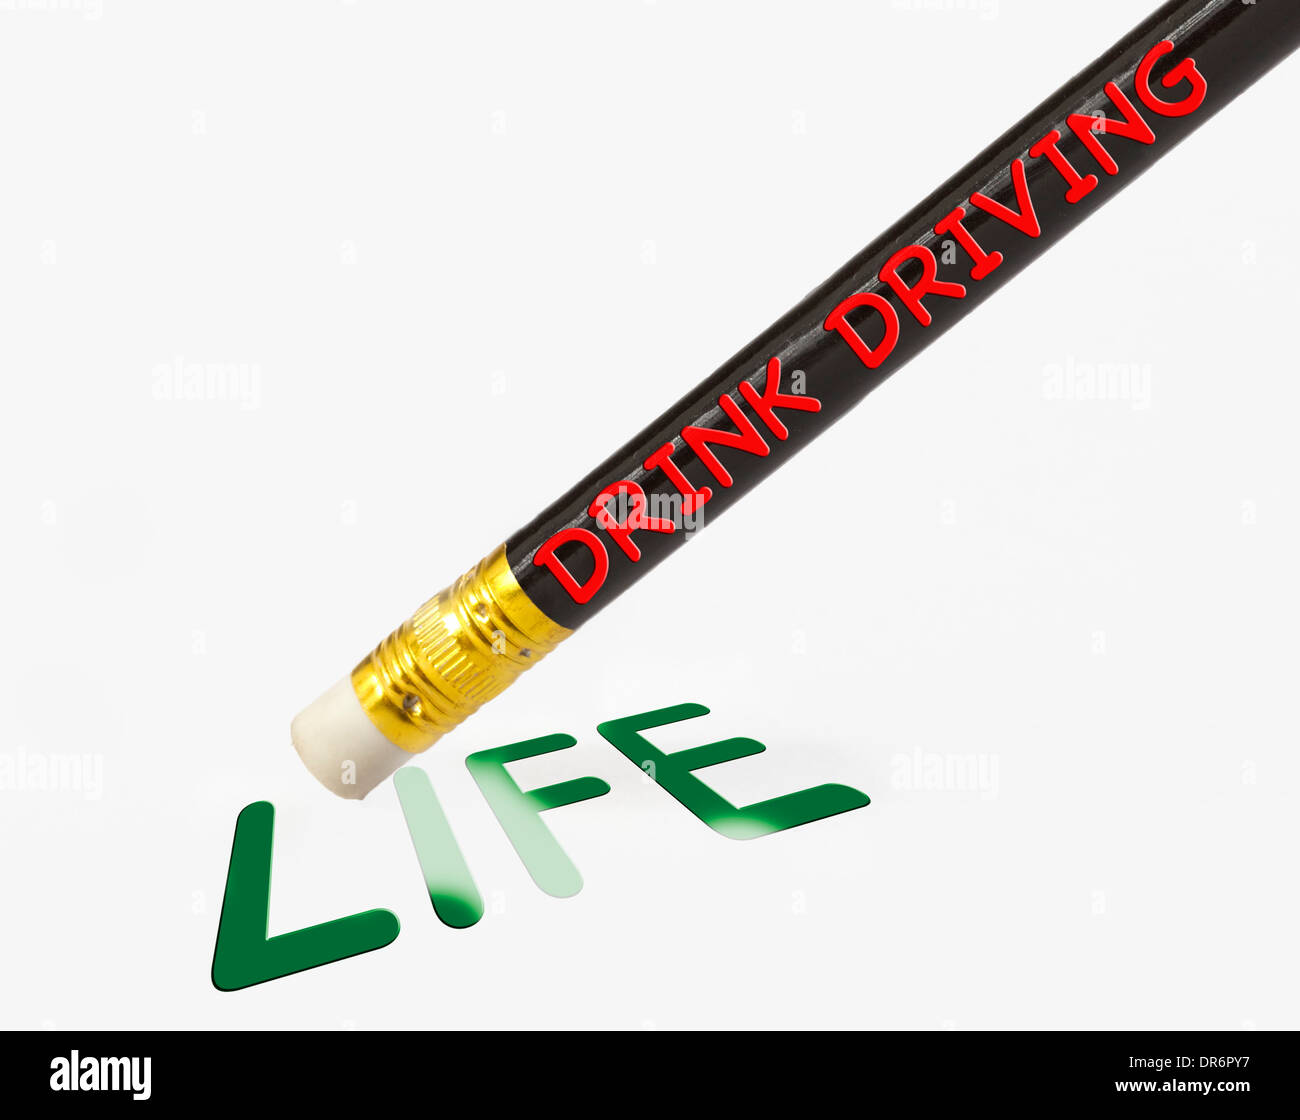 Concept of drink driving leading to death erasing life Stock Photo